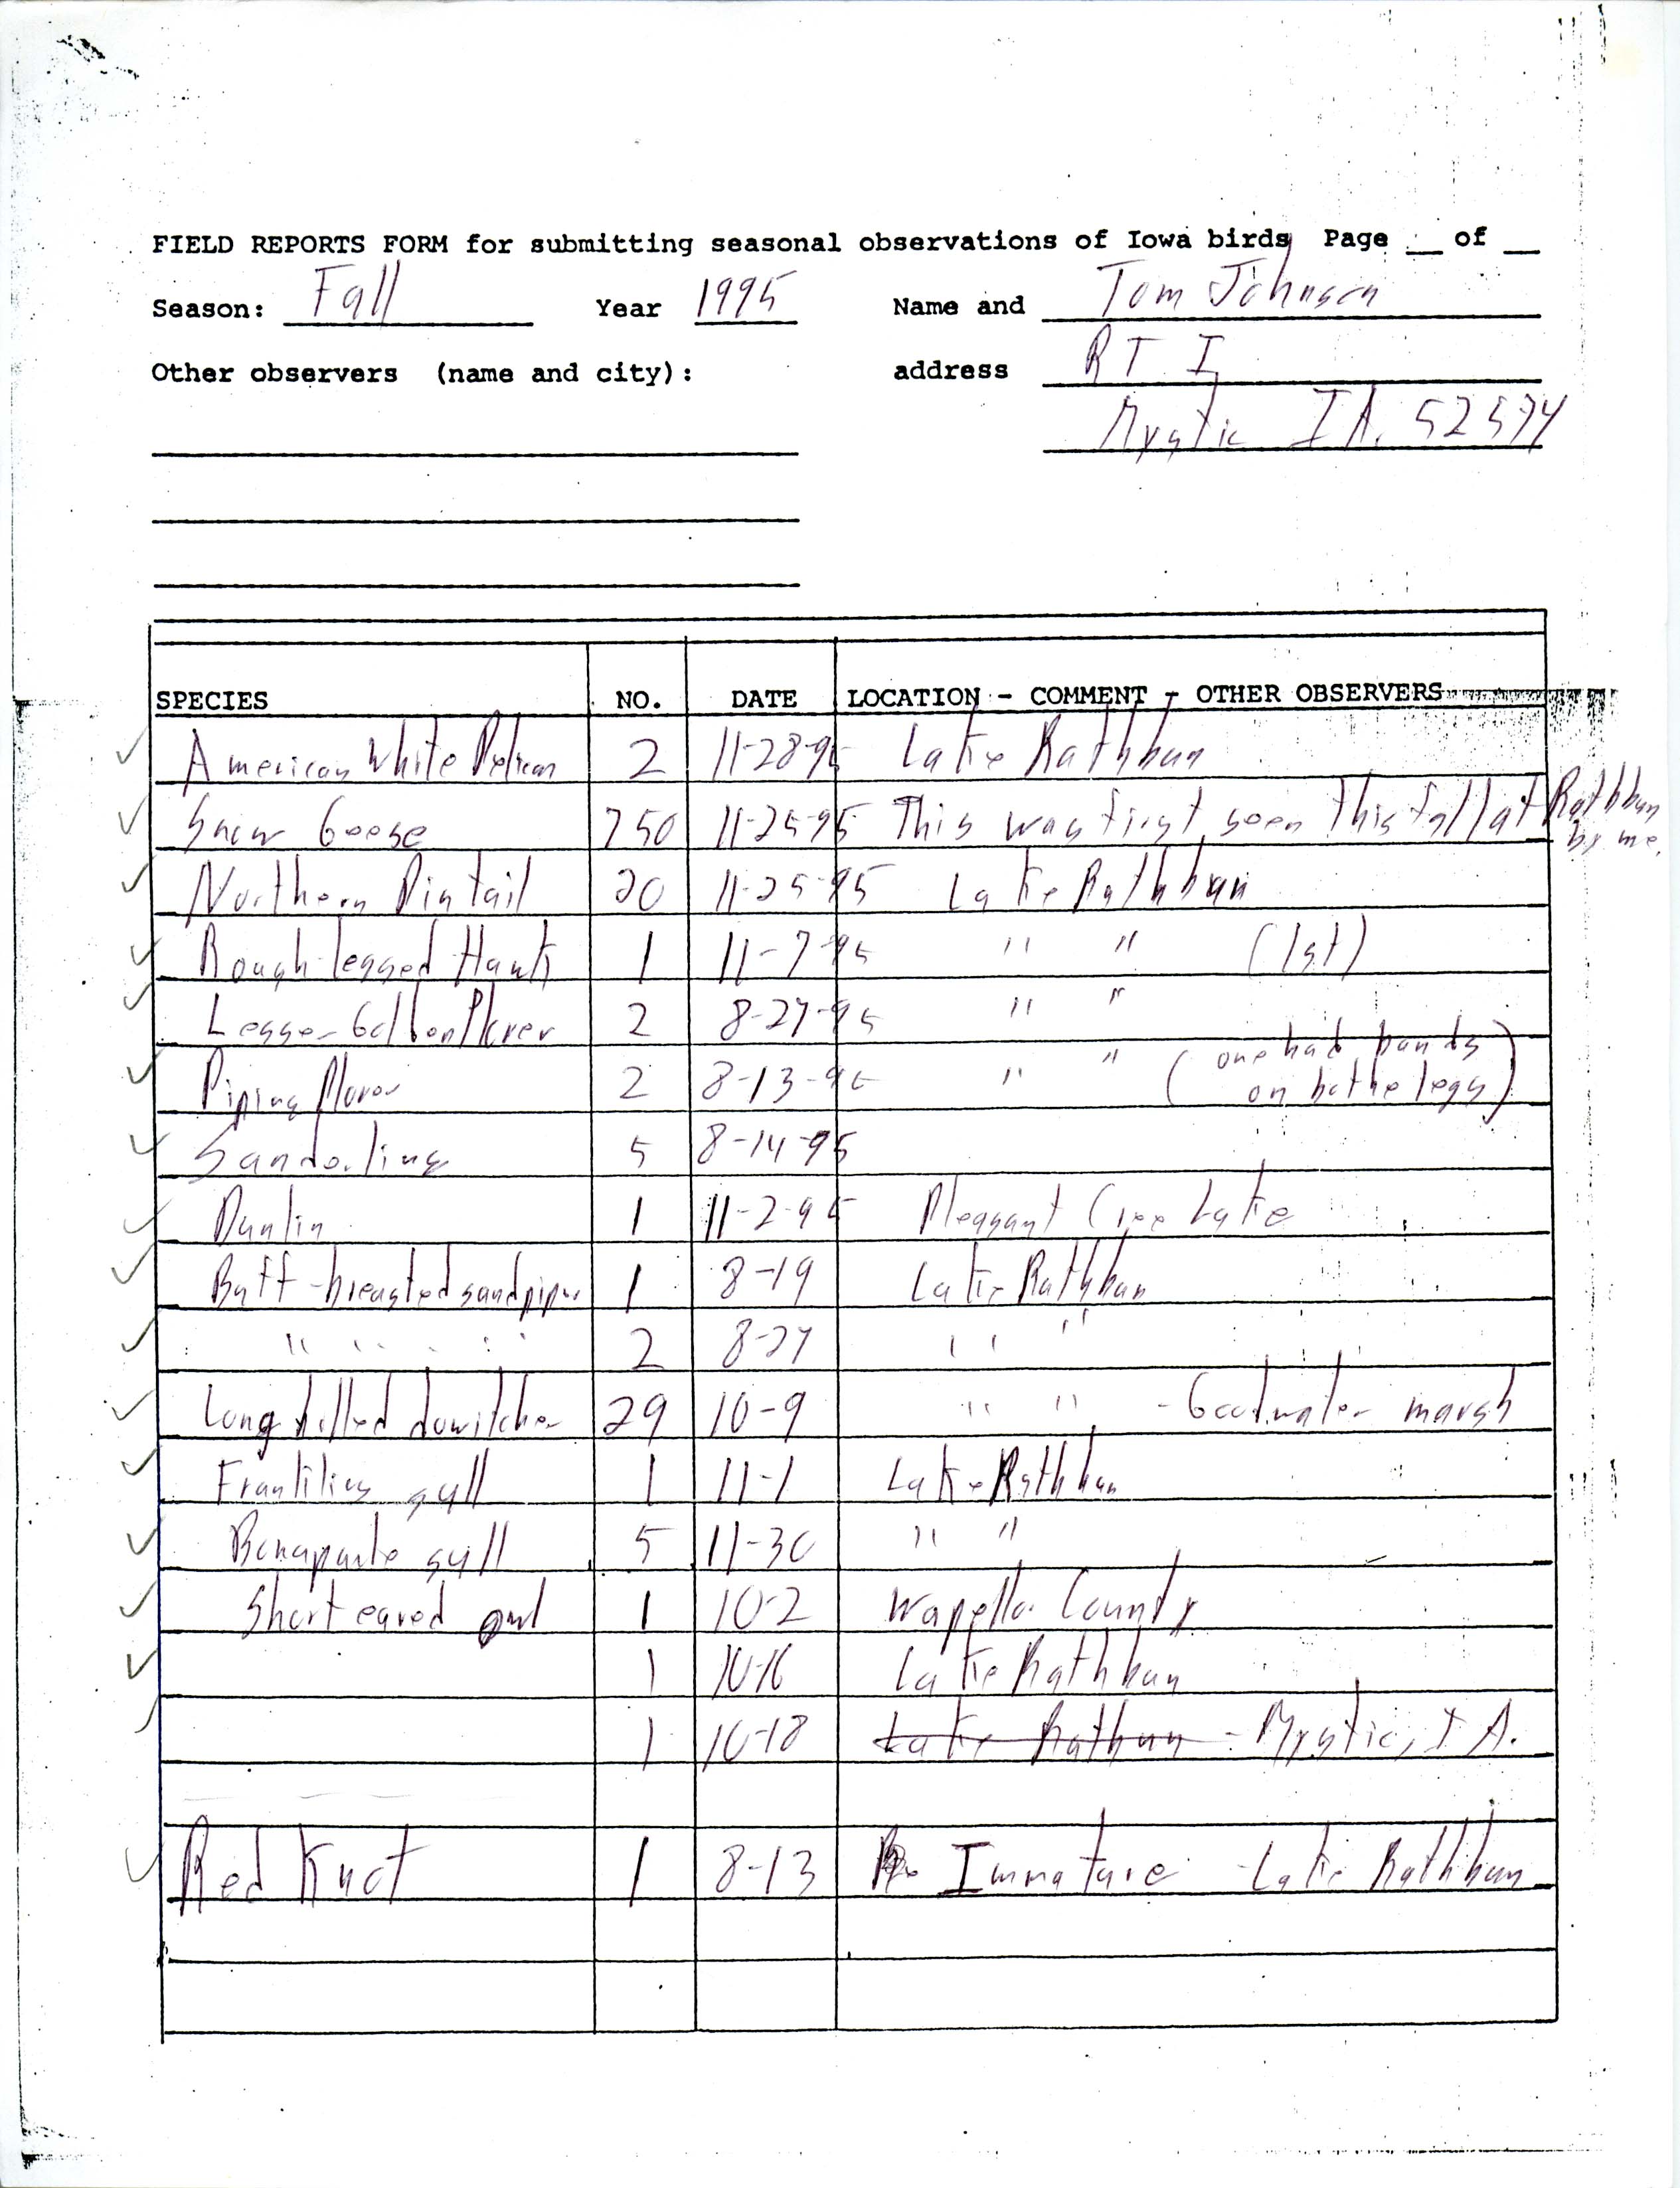 Field reports form for submitting seasonal observations of Iowa birds, Thomas N. Johnson, fall 1995